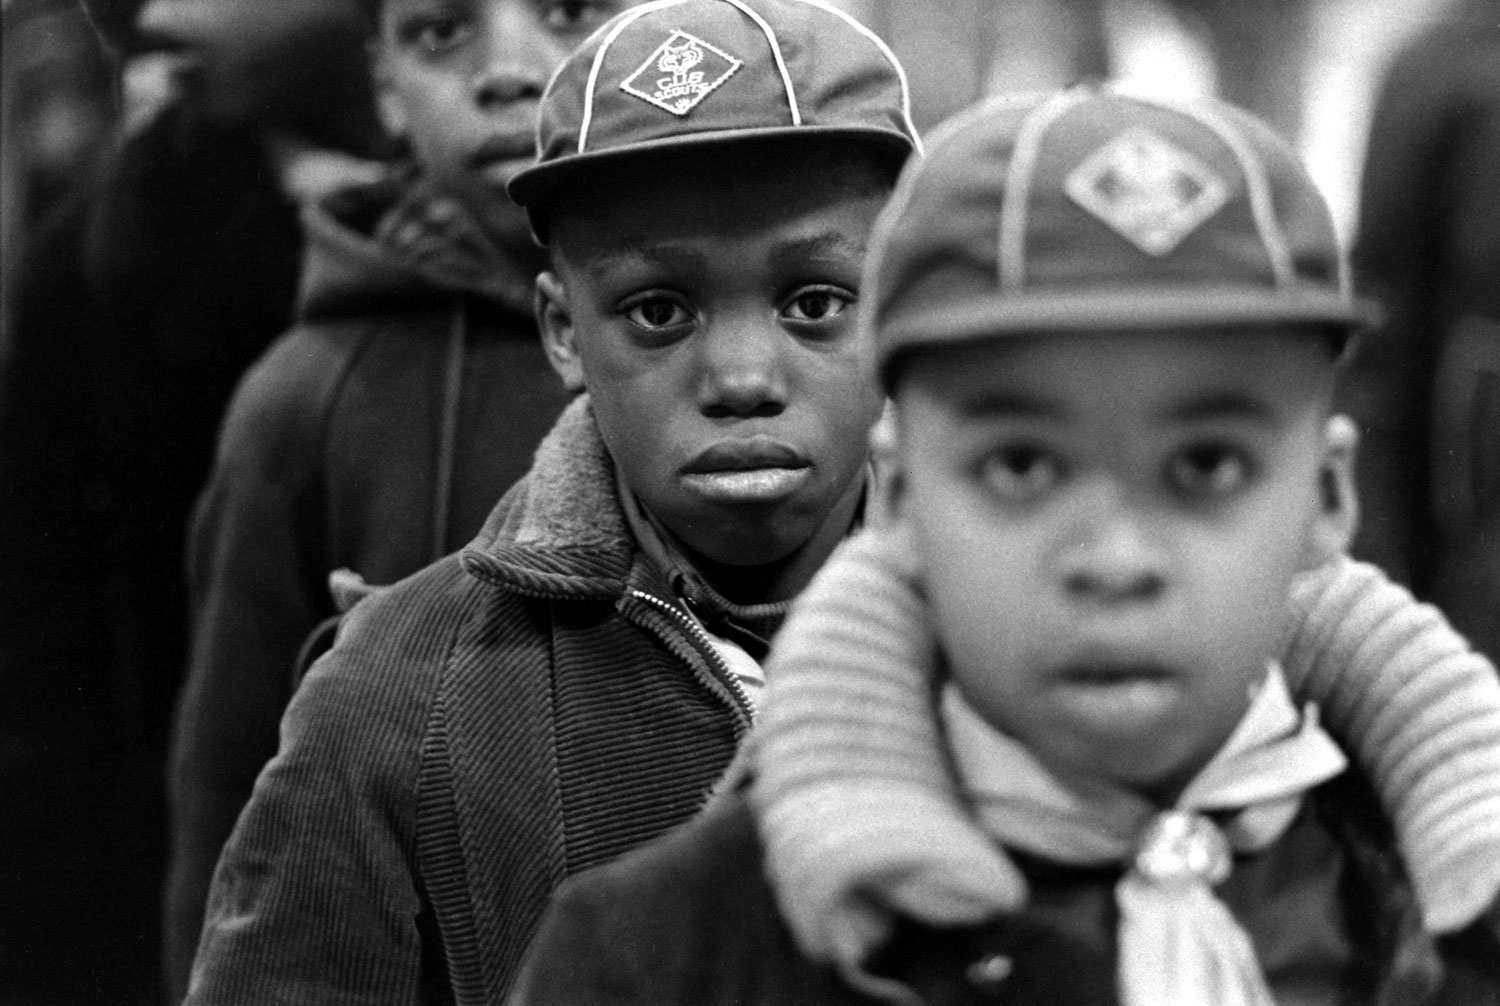 Chicago Boy Scouts, 1971